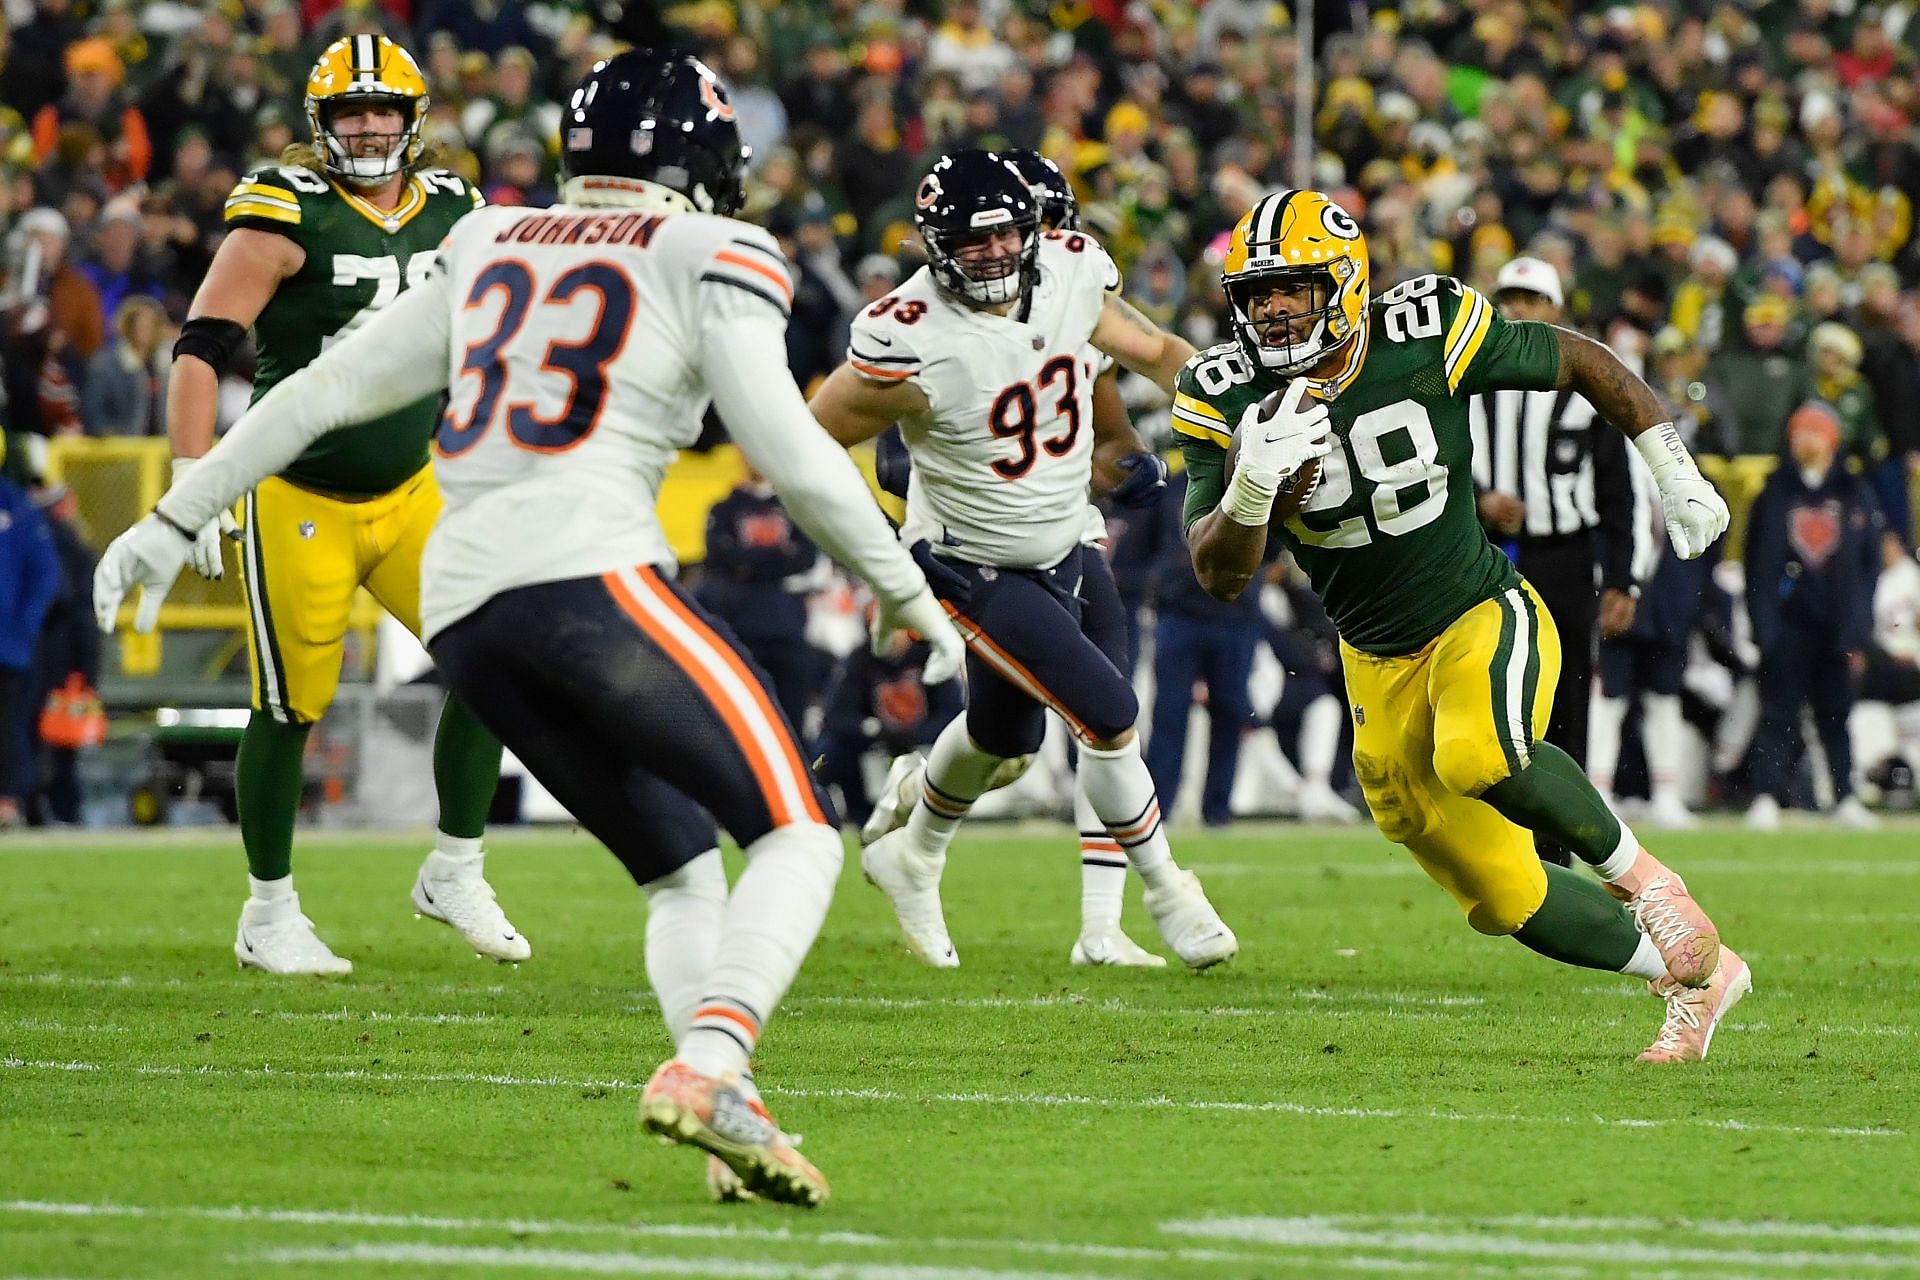 The Bears and Packers at Lambeau Field on a Sunday night is a recipe for entertainment